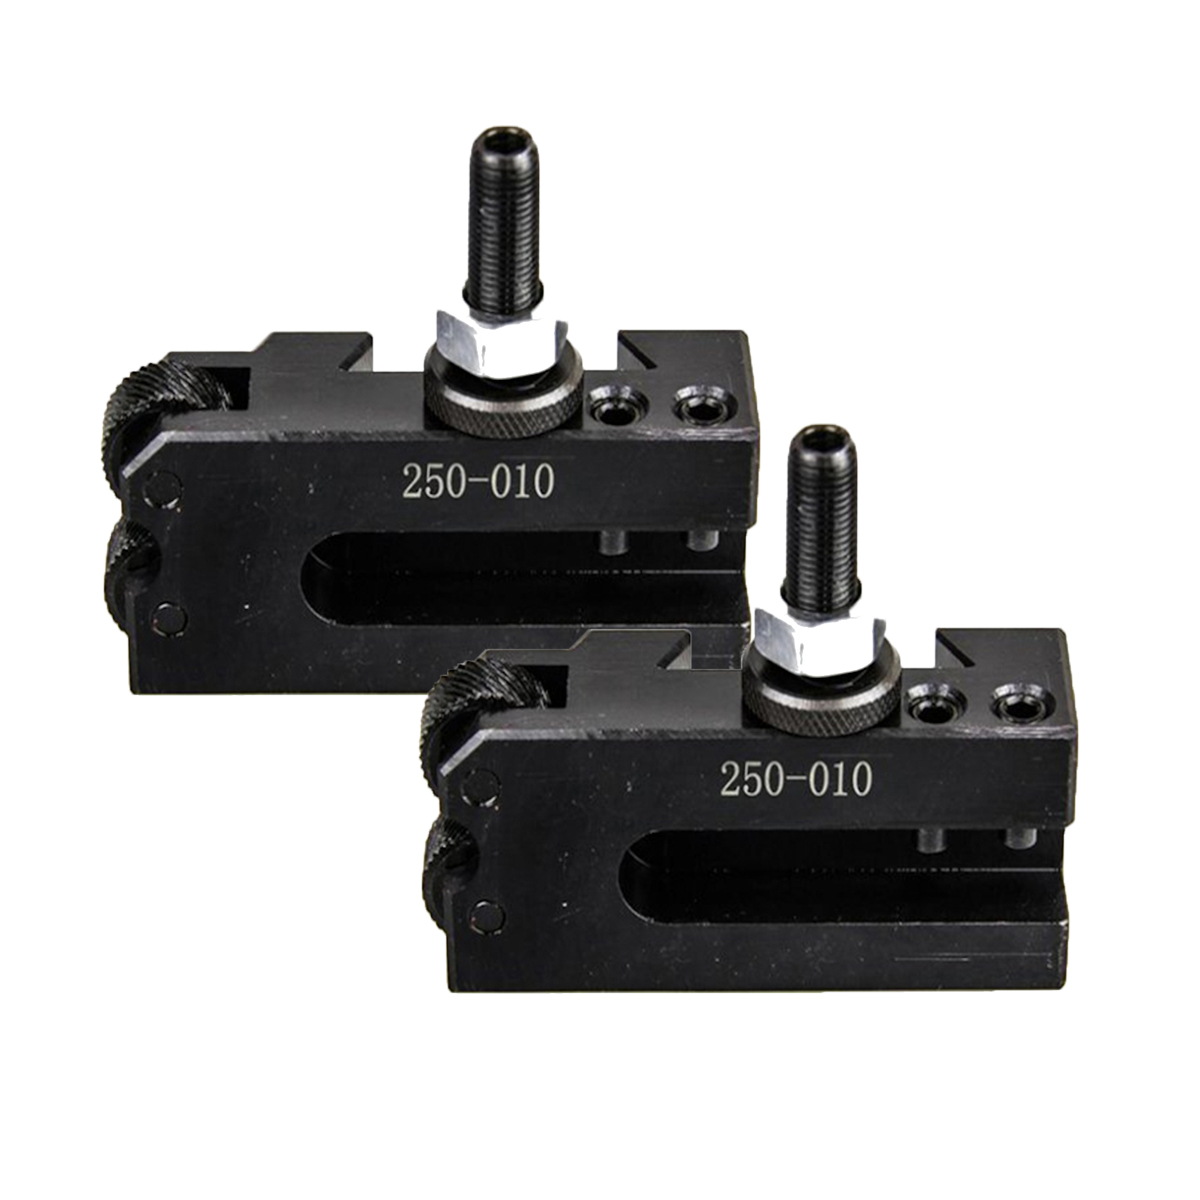 2-Piece-Set-Of-Machifit-250-000-Wedge-Main-Body-Tool-Holder-Exclusively-For-250-100250-111-Tool-Hold-1824364-6